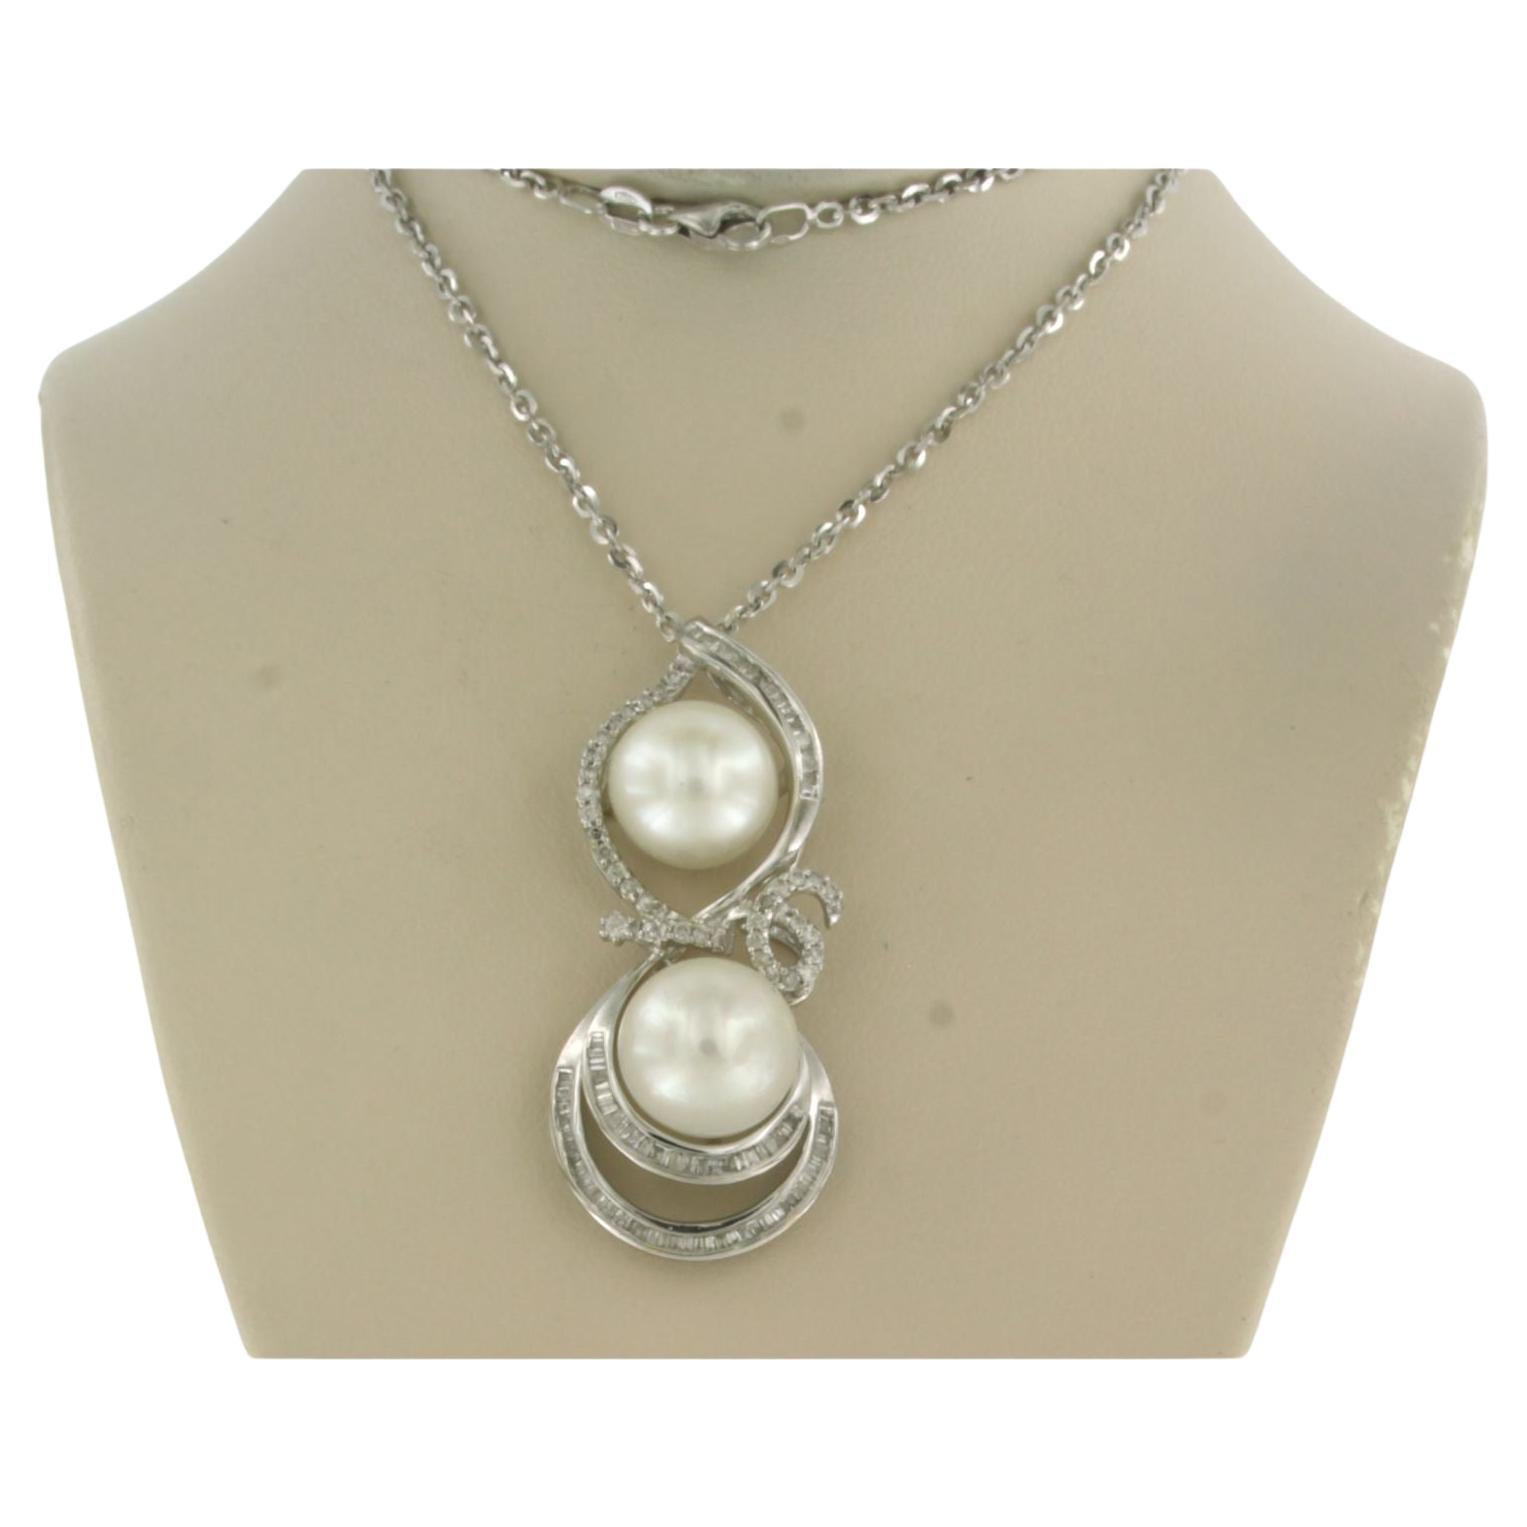 Necklace and pendant set with pearl and diamonds 18k white gold